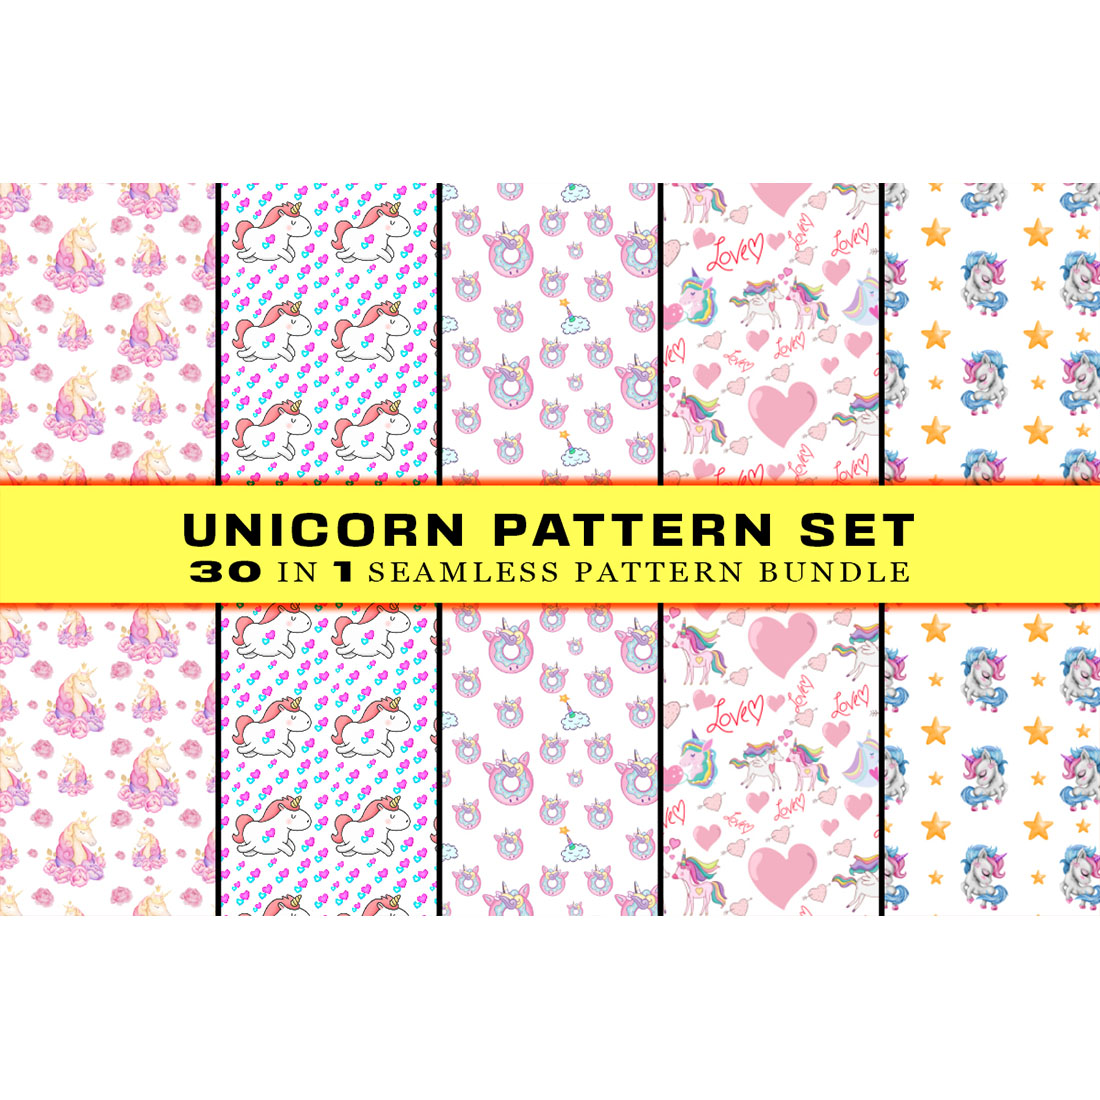 Pack of images of charming patterns with unicorns